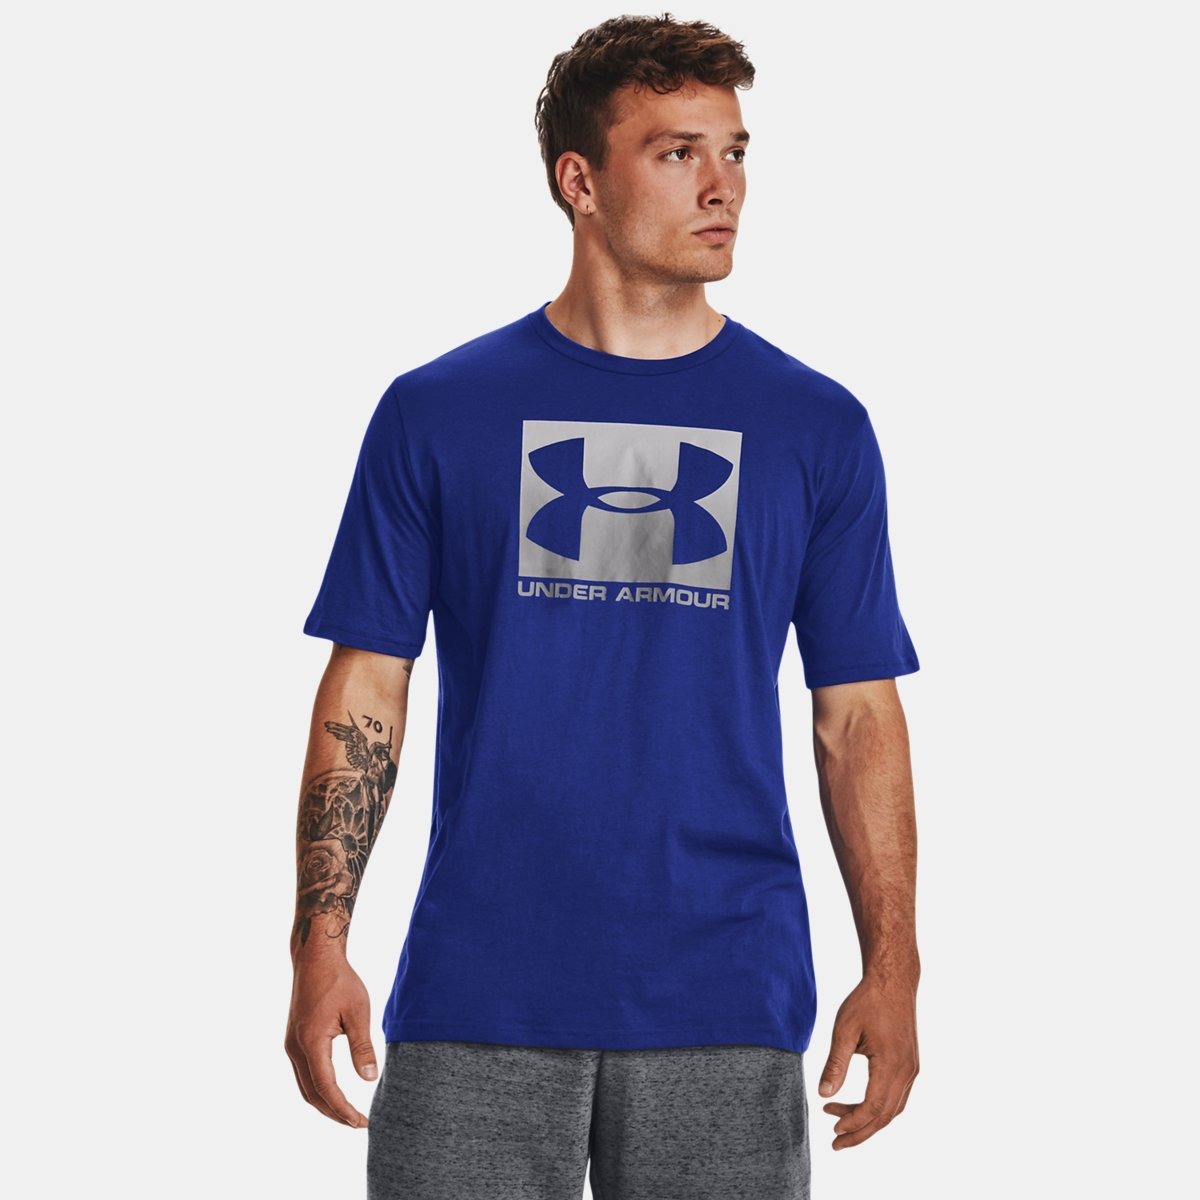 Gent Blue T-Shirt by Under Armour GOOFASH